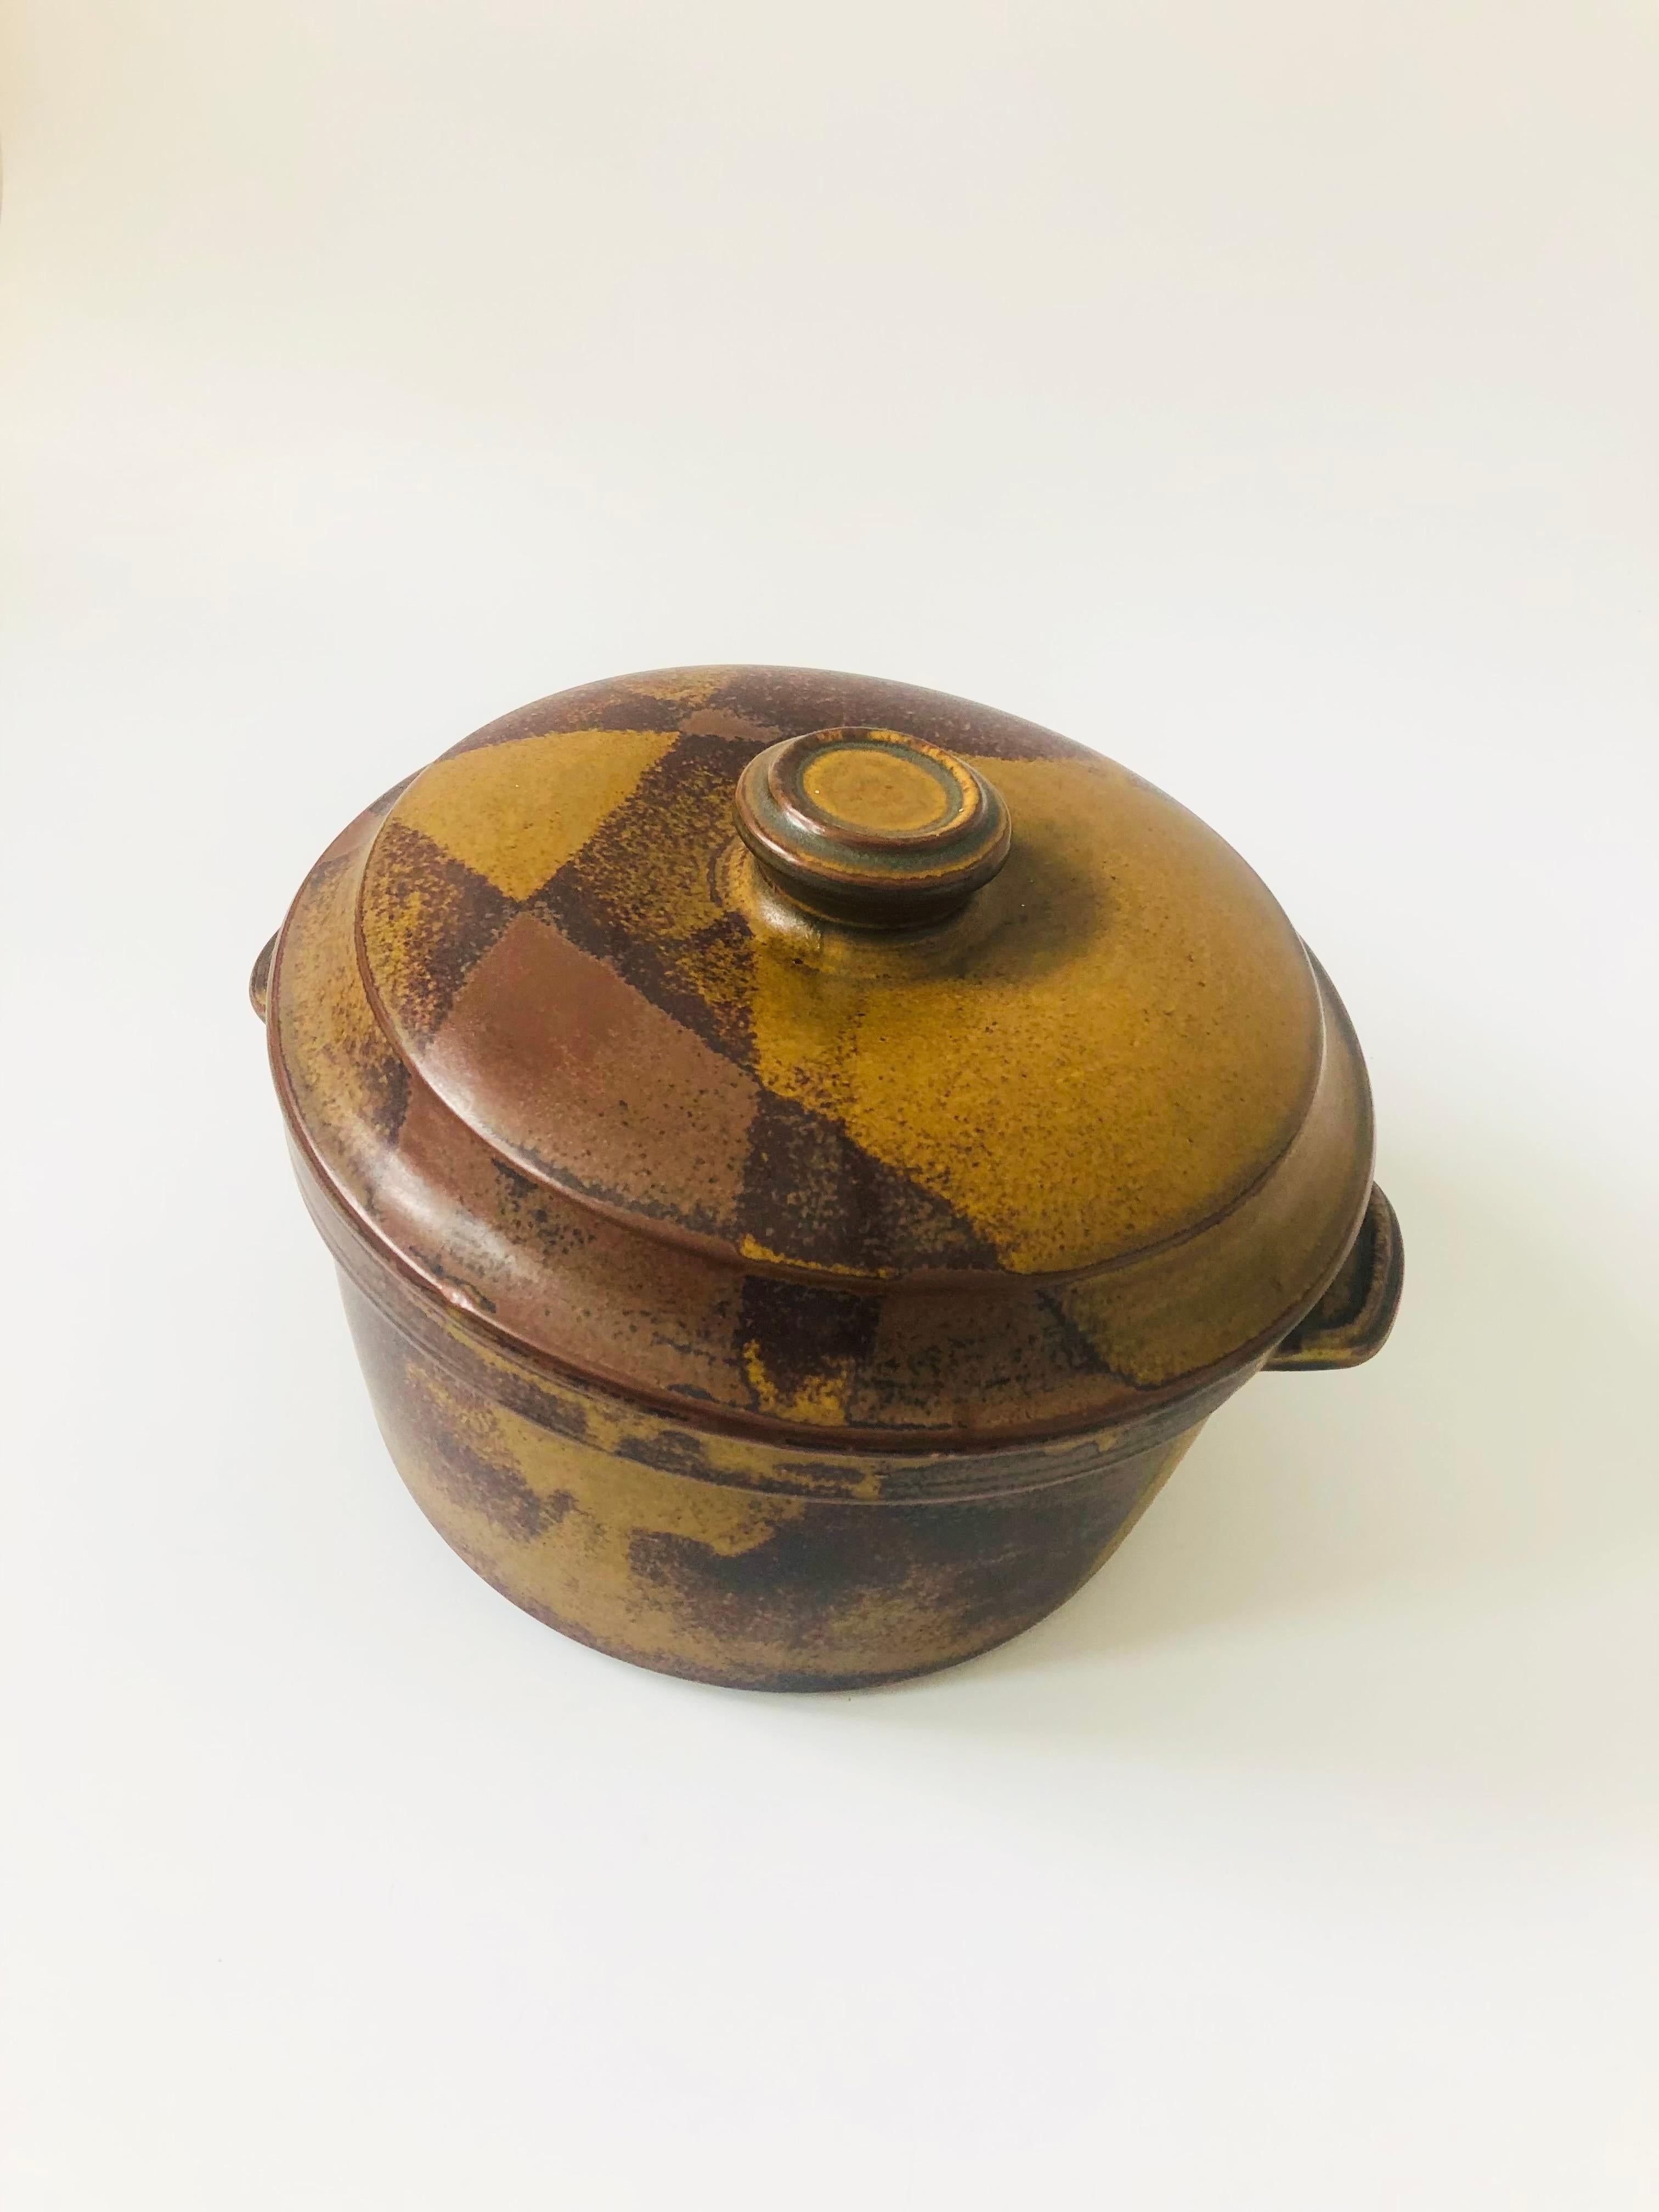 An extra large vintage studio pottery lidded serving bowl. Nice size for serving or storage with beautiful earth tone overlapping glazes.
   